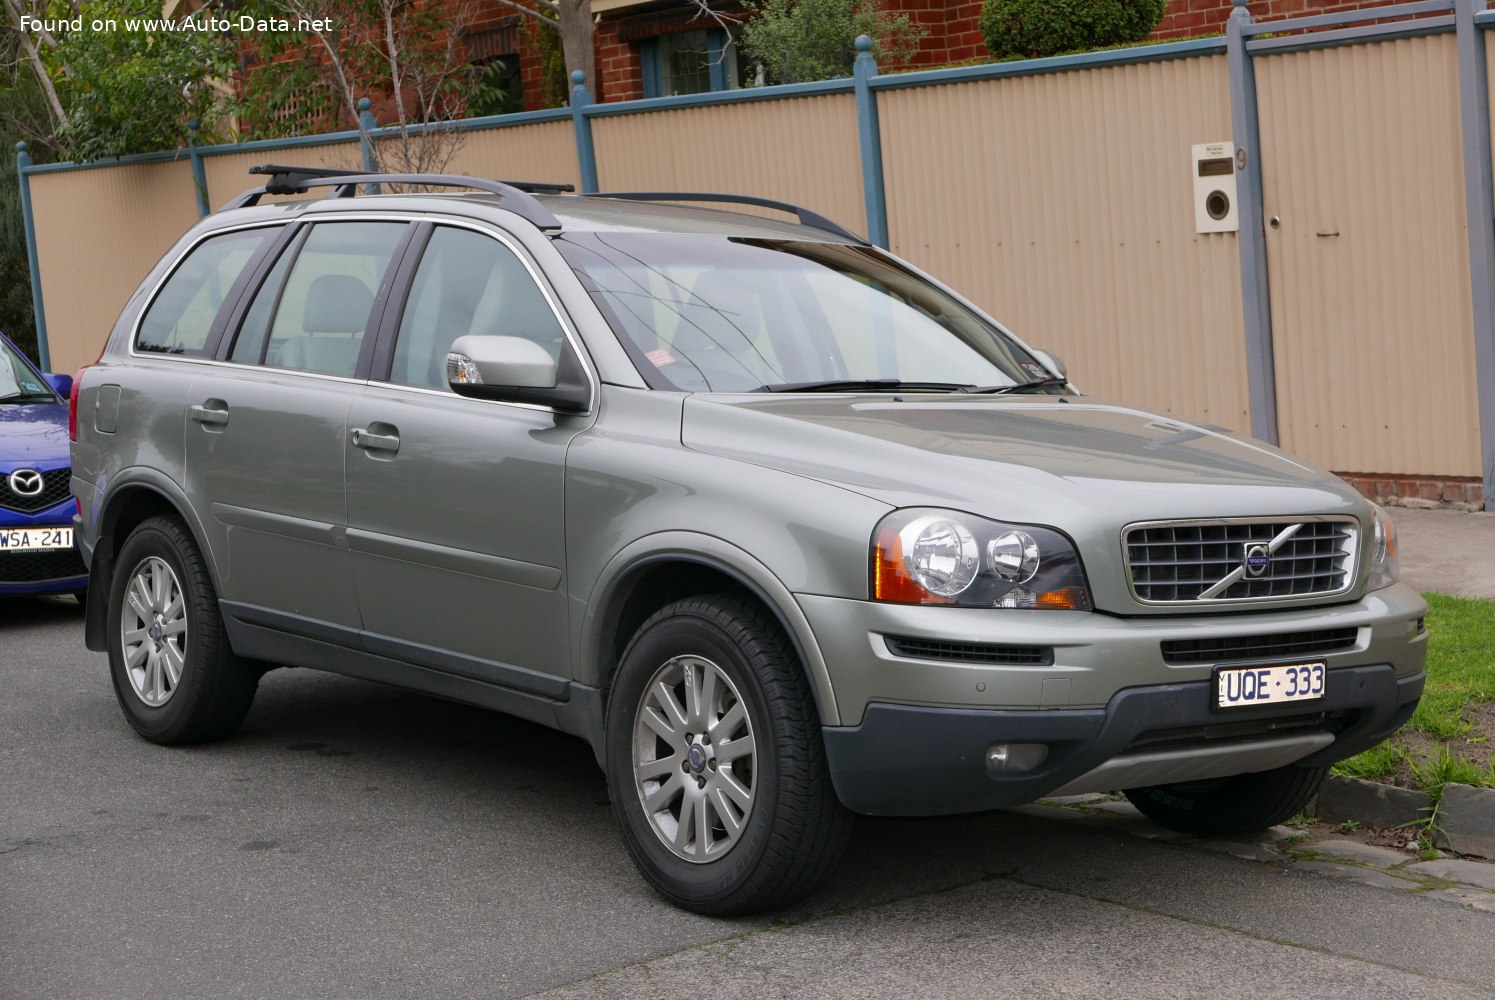 2007 Volvo XC90 (facelift 2007) 2.4 D5 (185 PS) Automatic